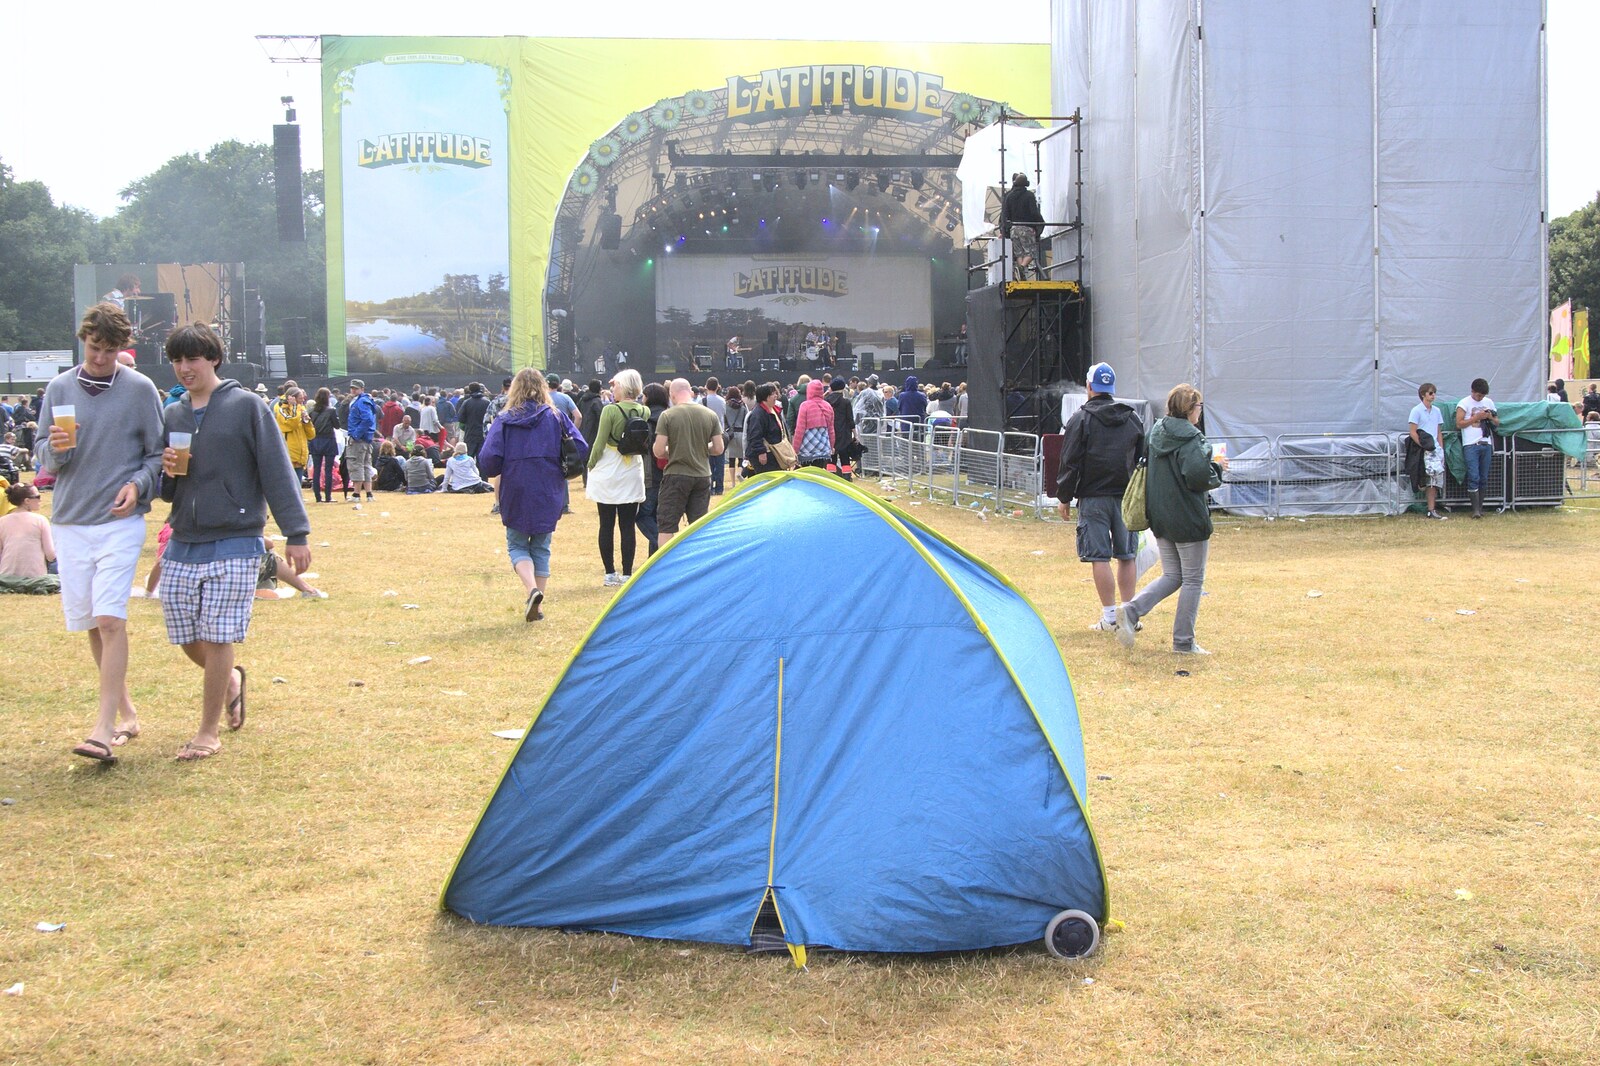 A lone tent in front of the main stage from The Latitude Festival, Henham Park, Suffolk - 20th July 2009